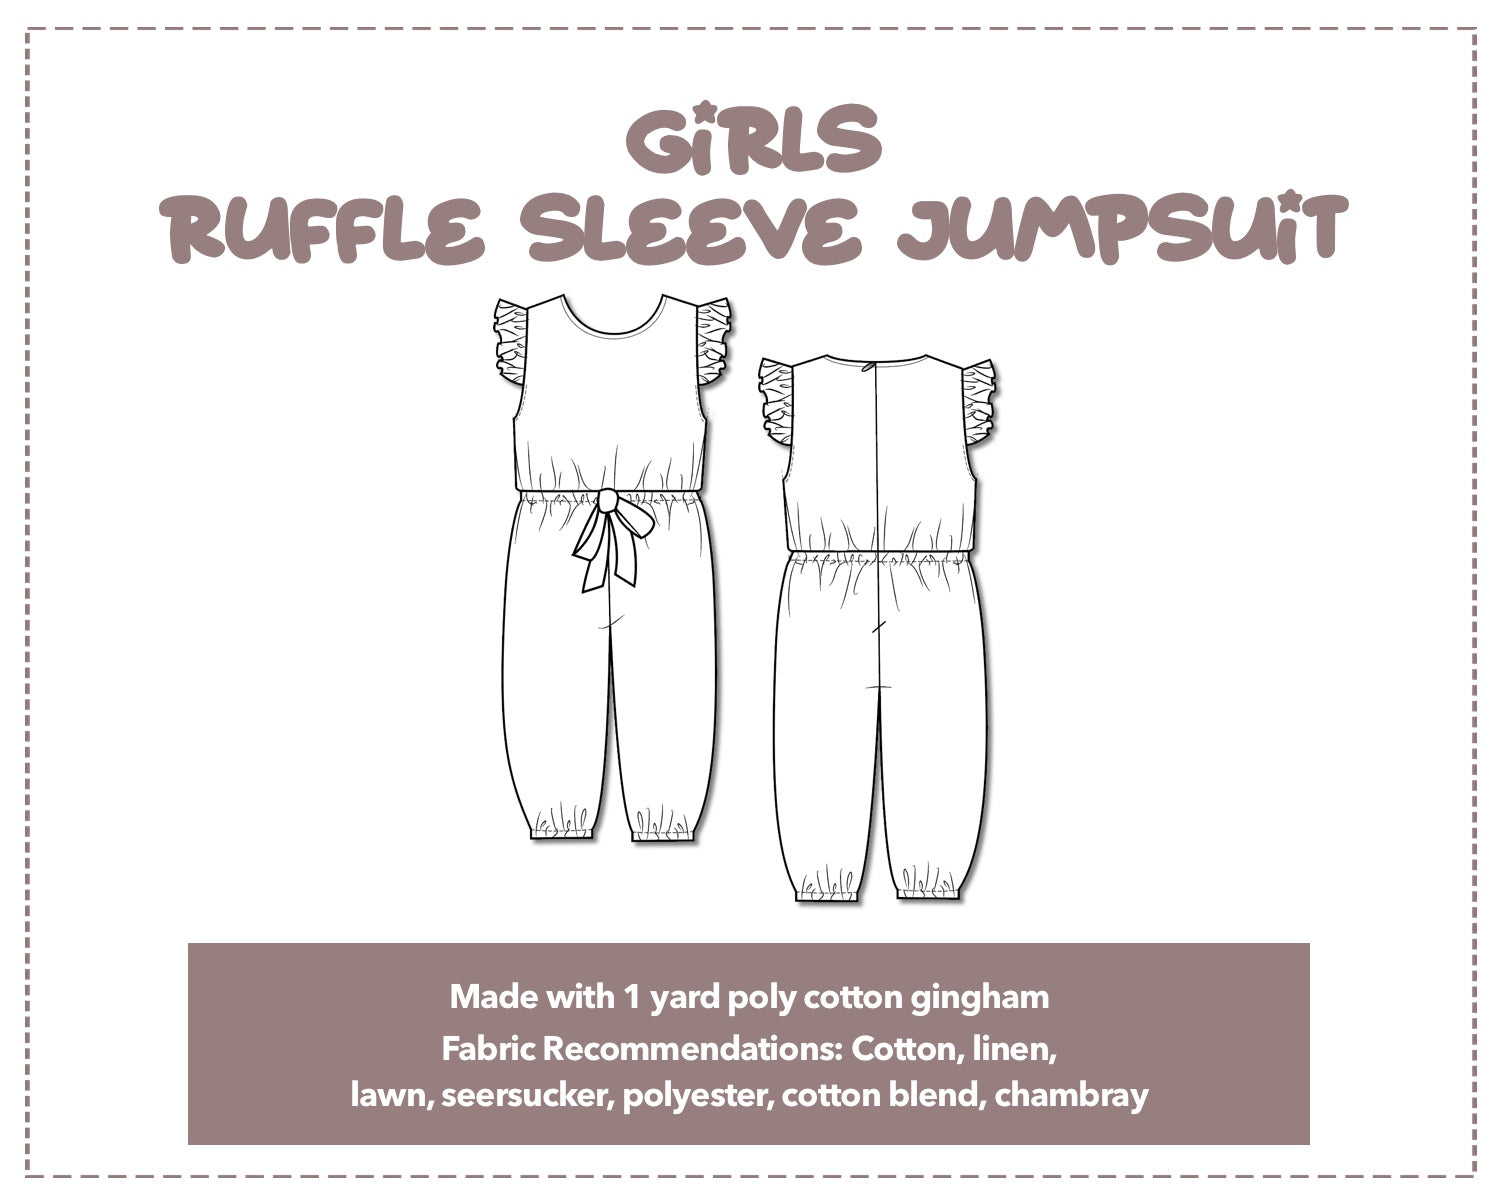 Illustration and detailed description for Girls Ruffle Sleeve Jumpsuit sewing pattern.